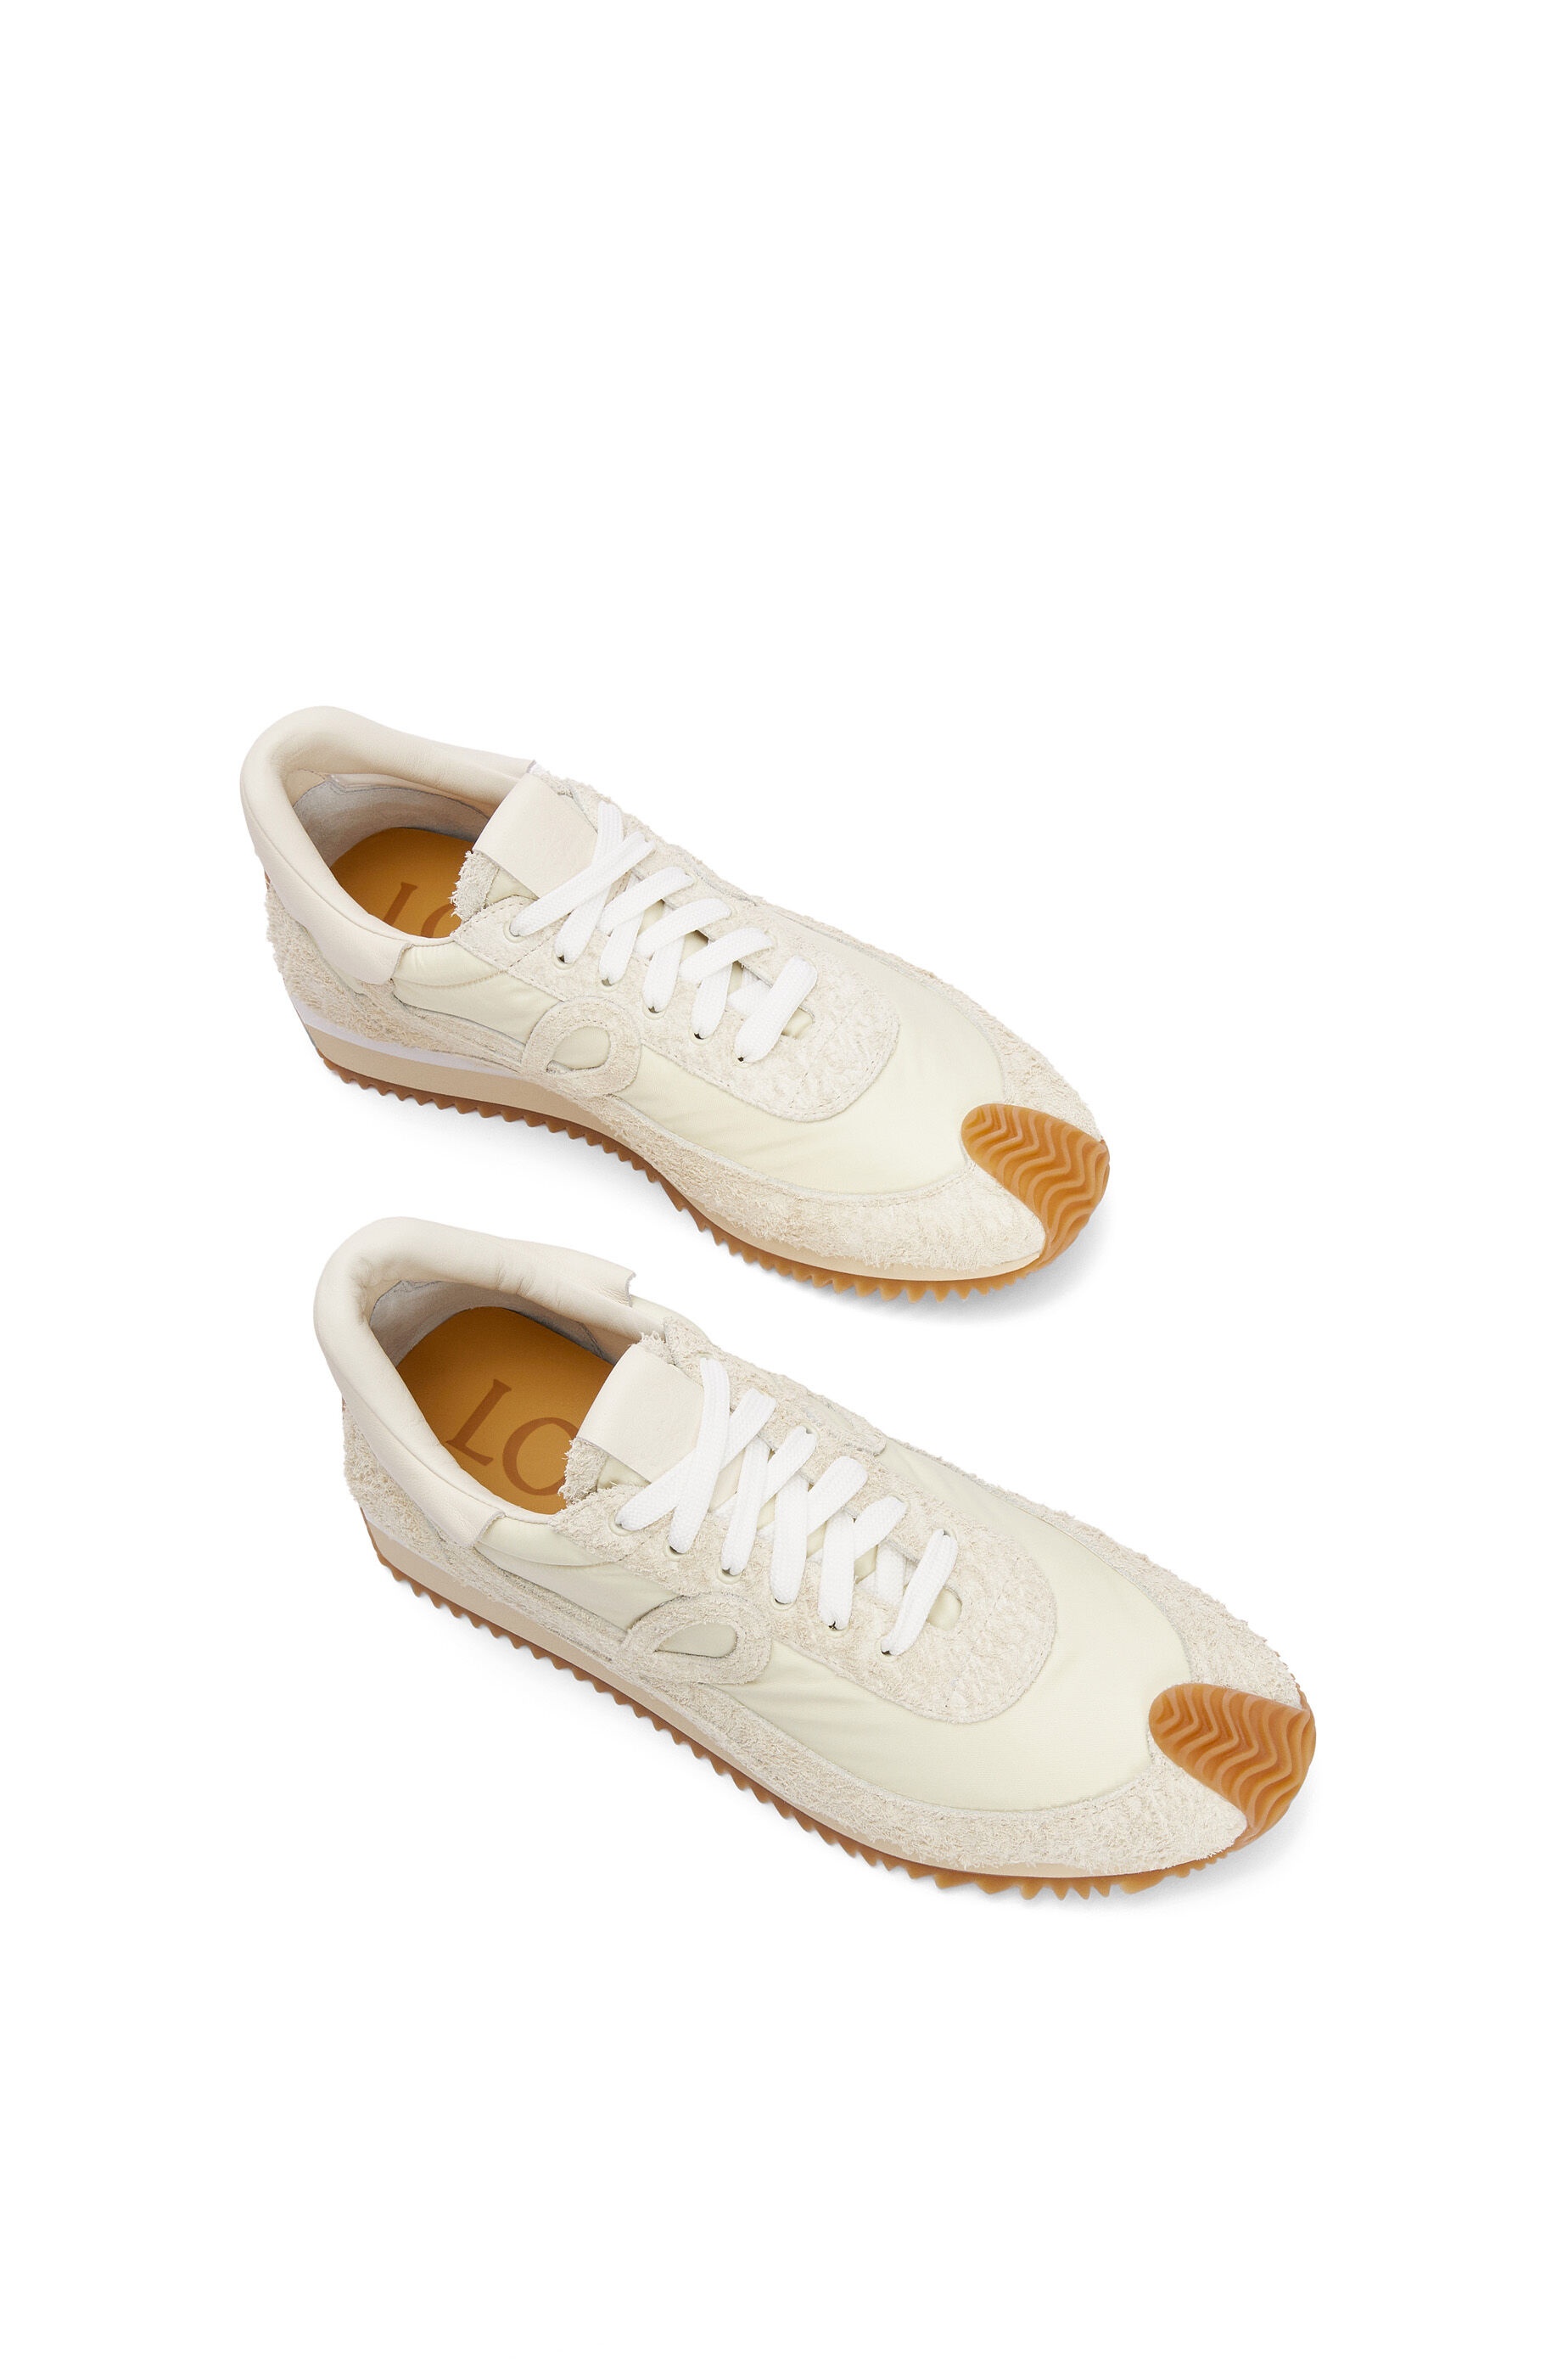 Flow Runner in nylon and suede - 3